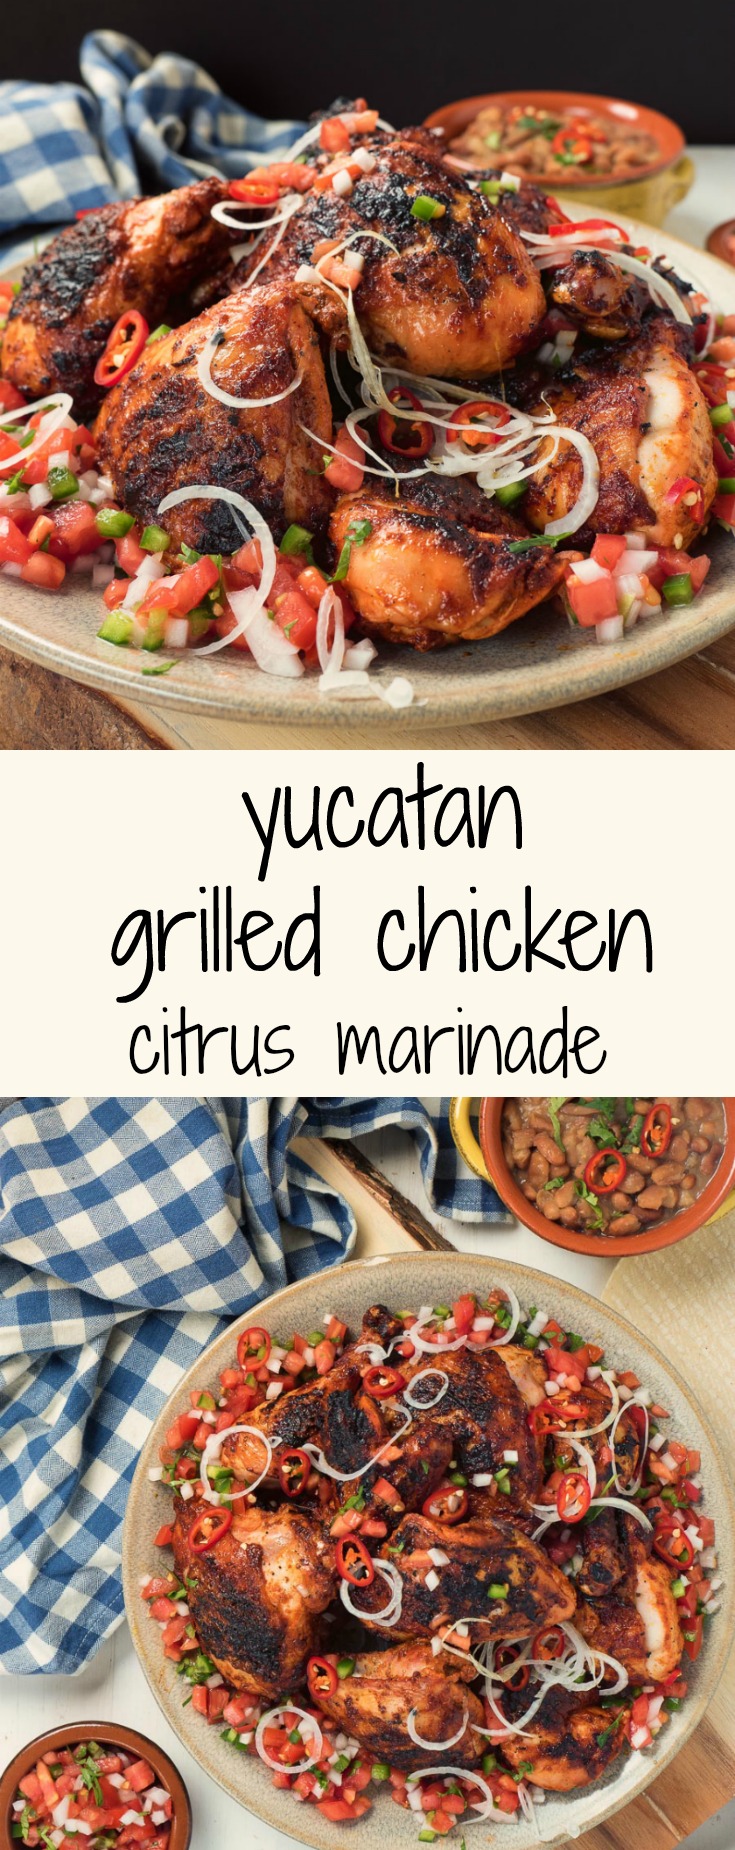 Bring the taste of Mexico to your grill with this easy to make Yucatan chicken.